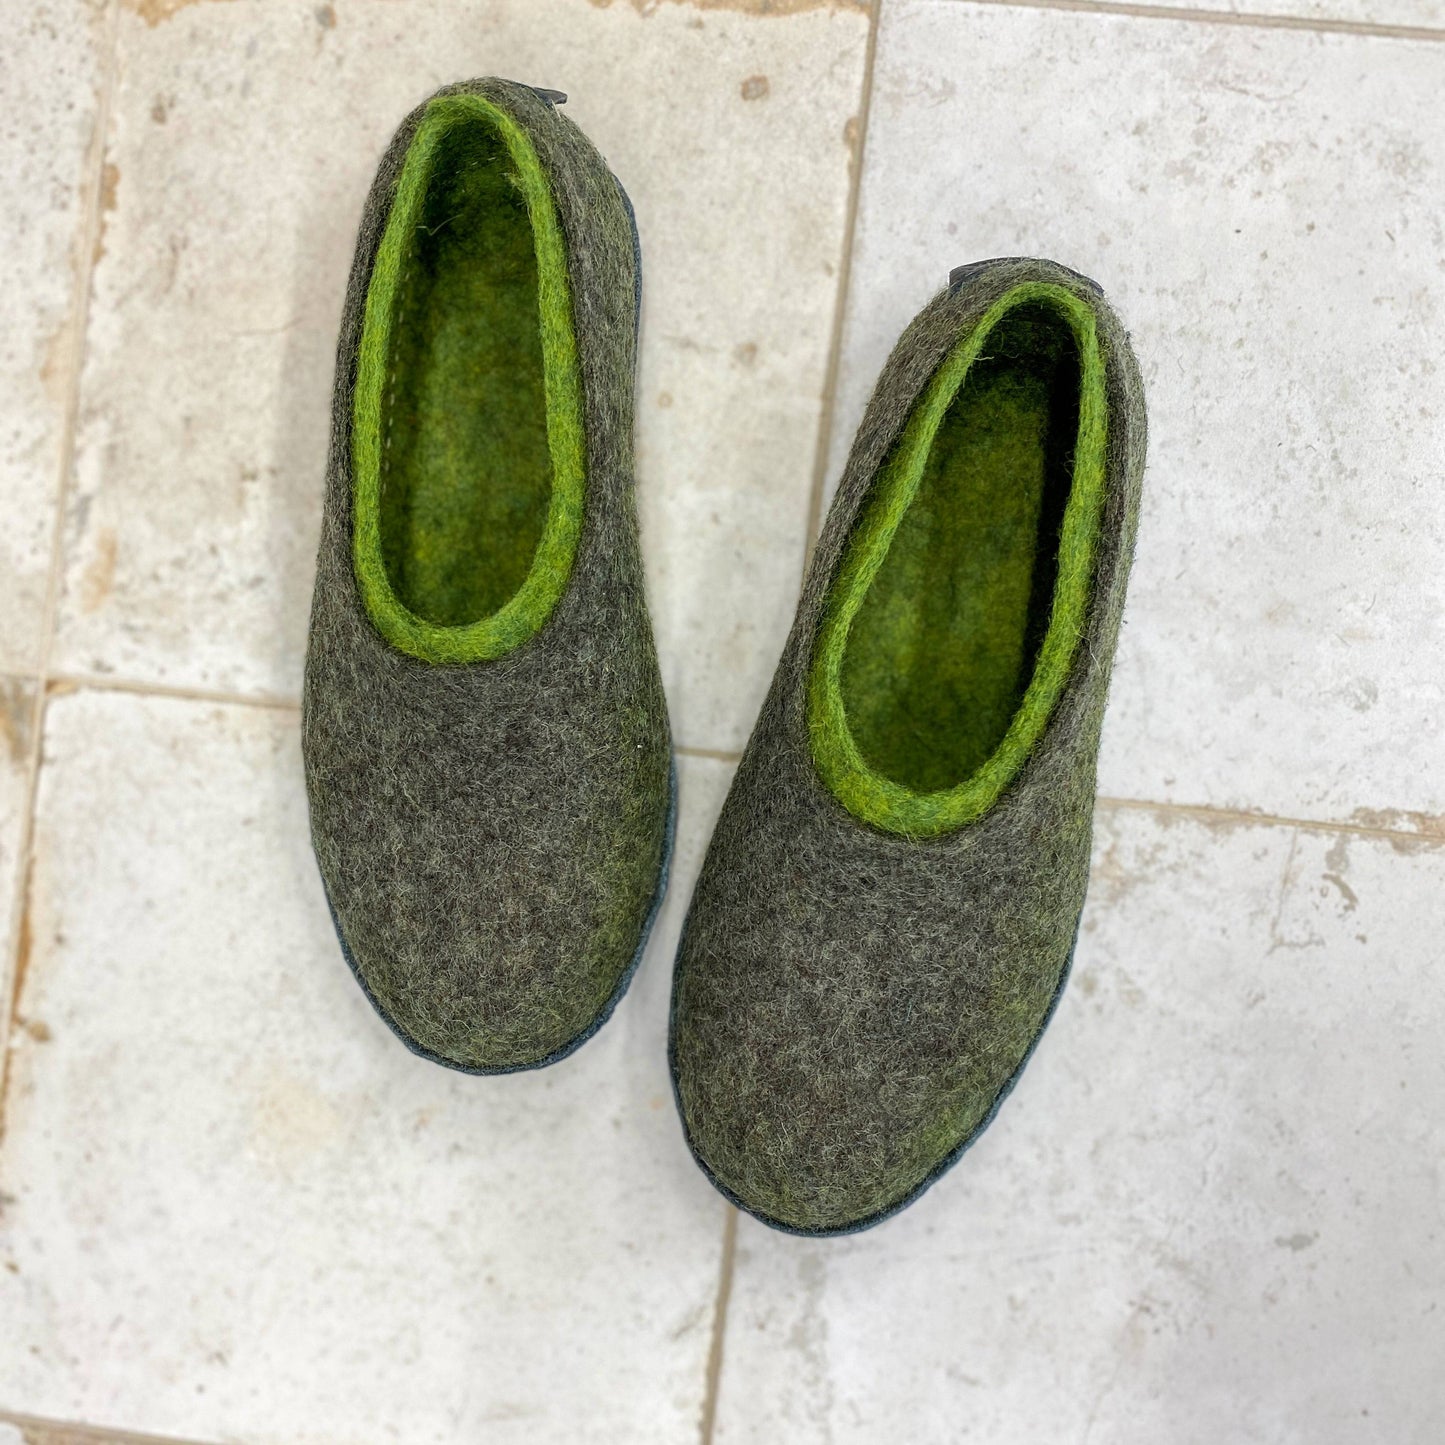 BureBure house slippers for women are 100 % handmade from natural felted wool.